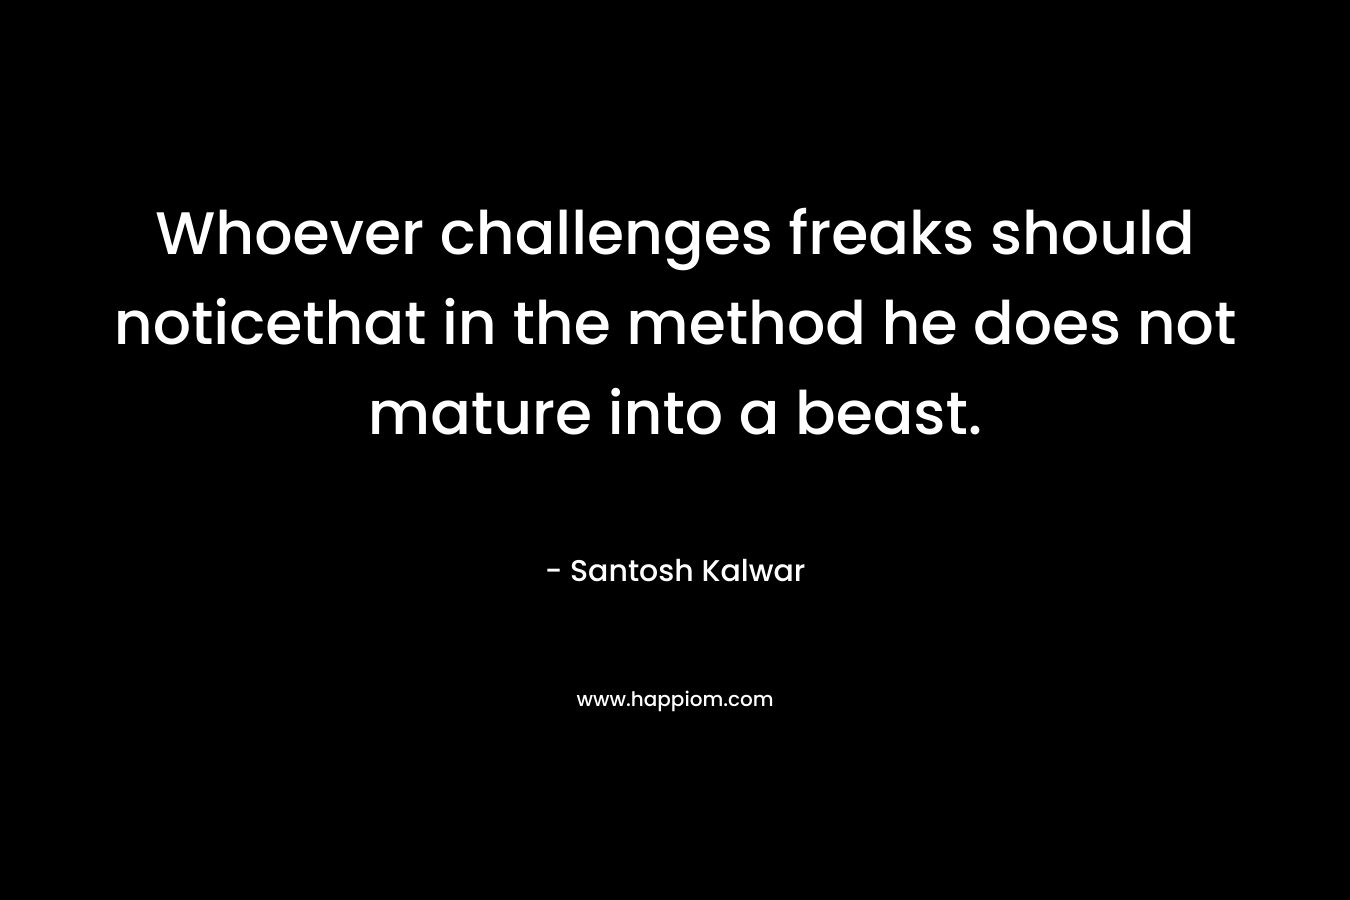 Whoever challenges freaks should noticethat in the method he does not mature into a beast.